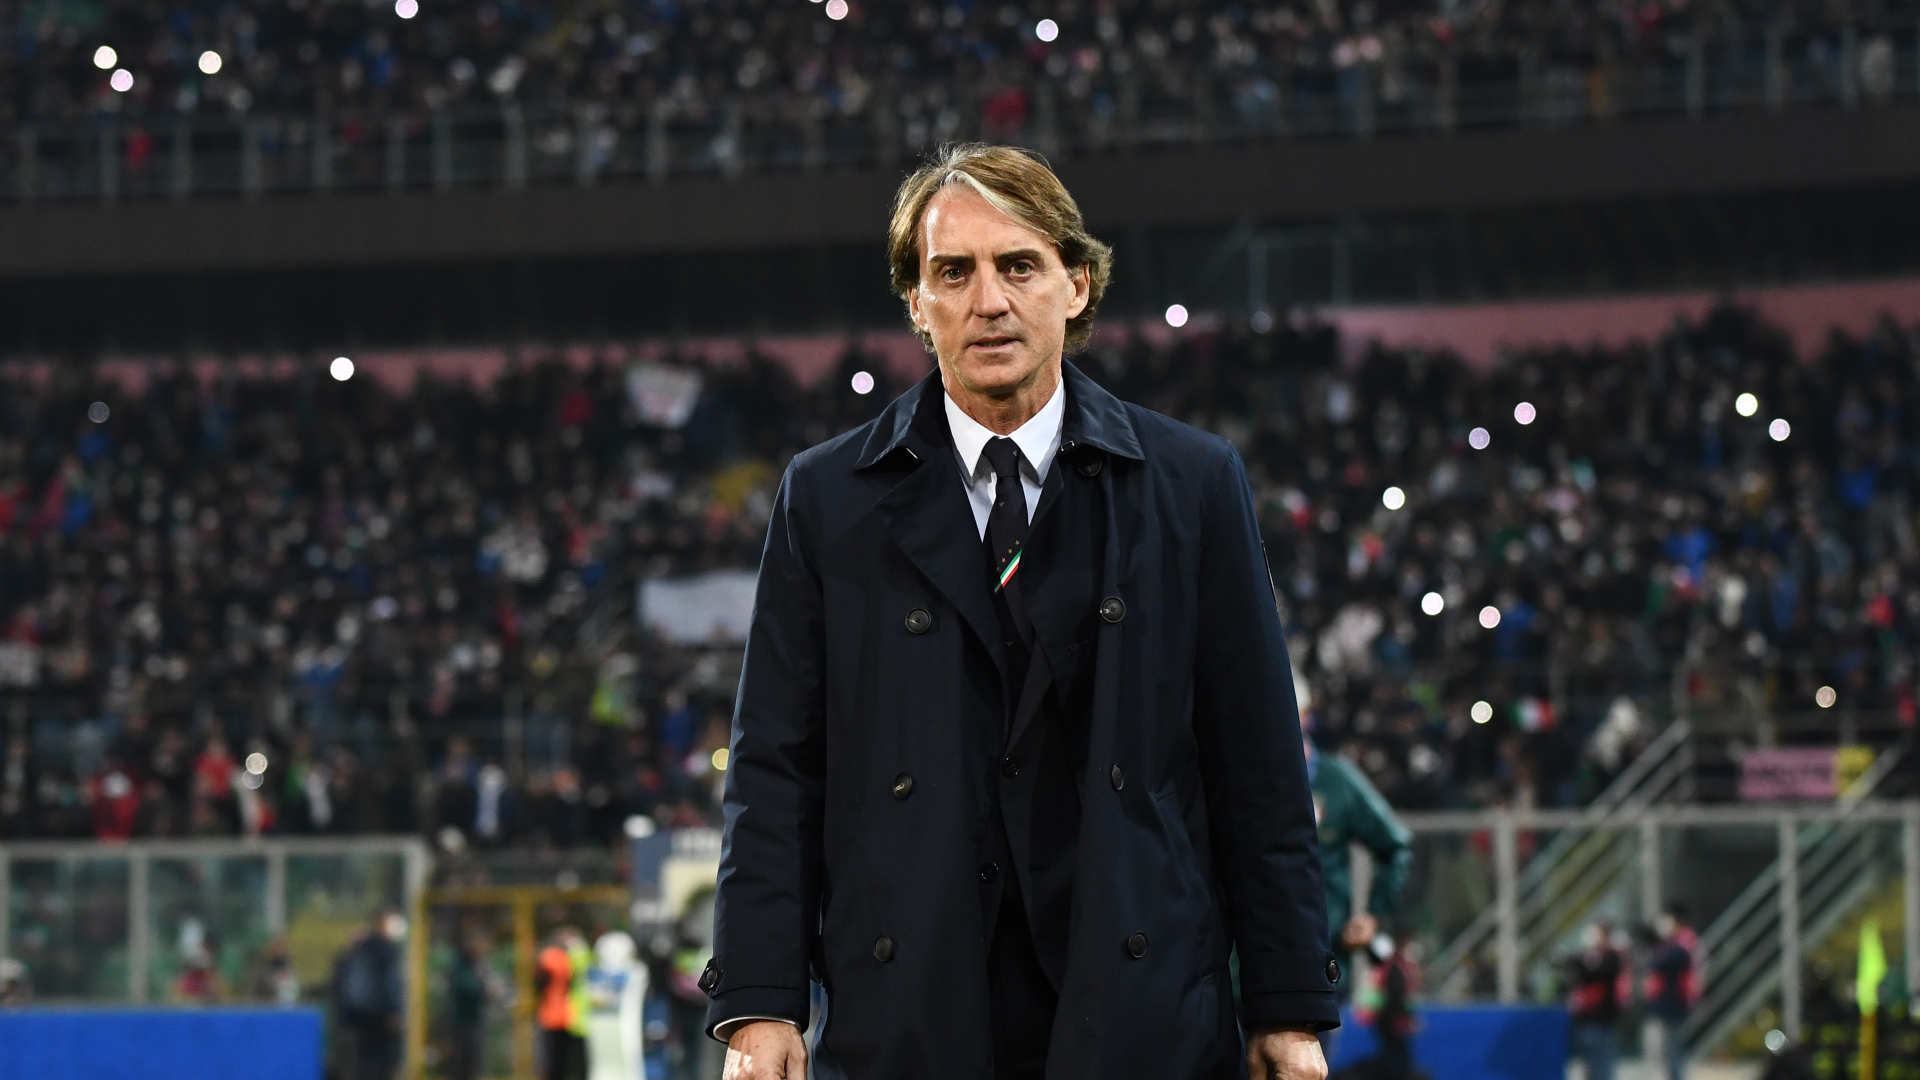 Mancini bemoans 'absurd' World Cup absence for Italy